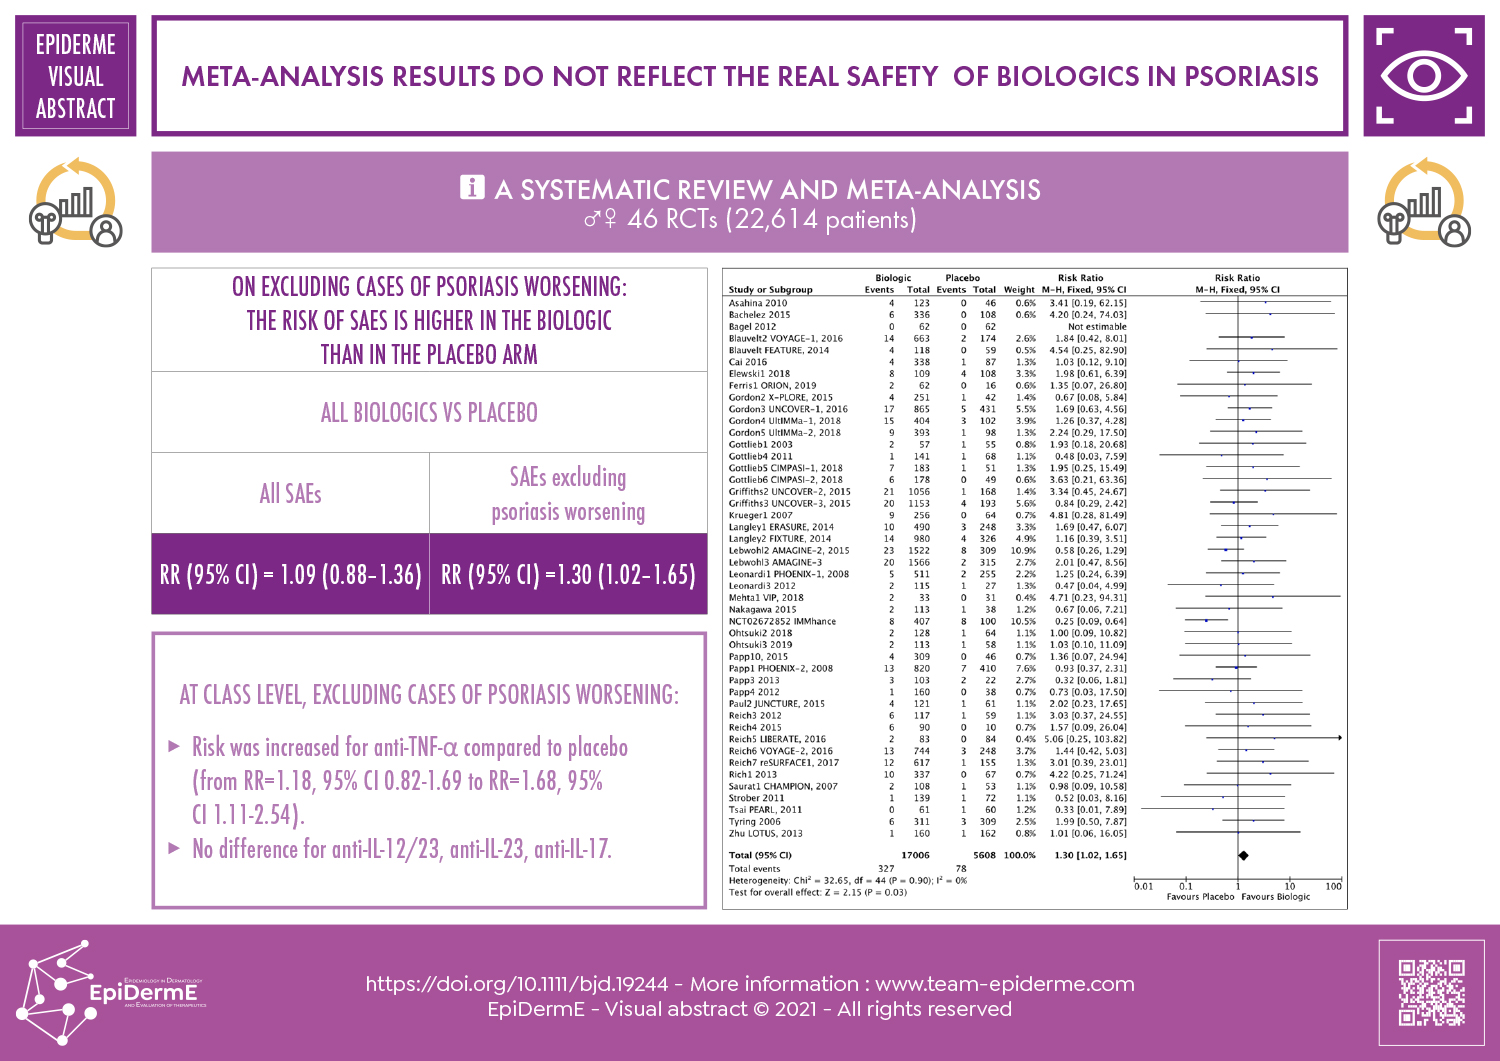 Meta-analysis results do not reflect the real safety of biologics in psoriasis